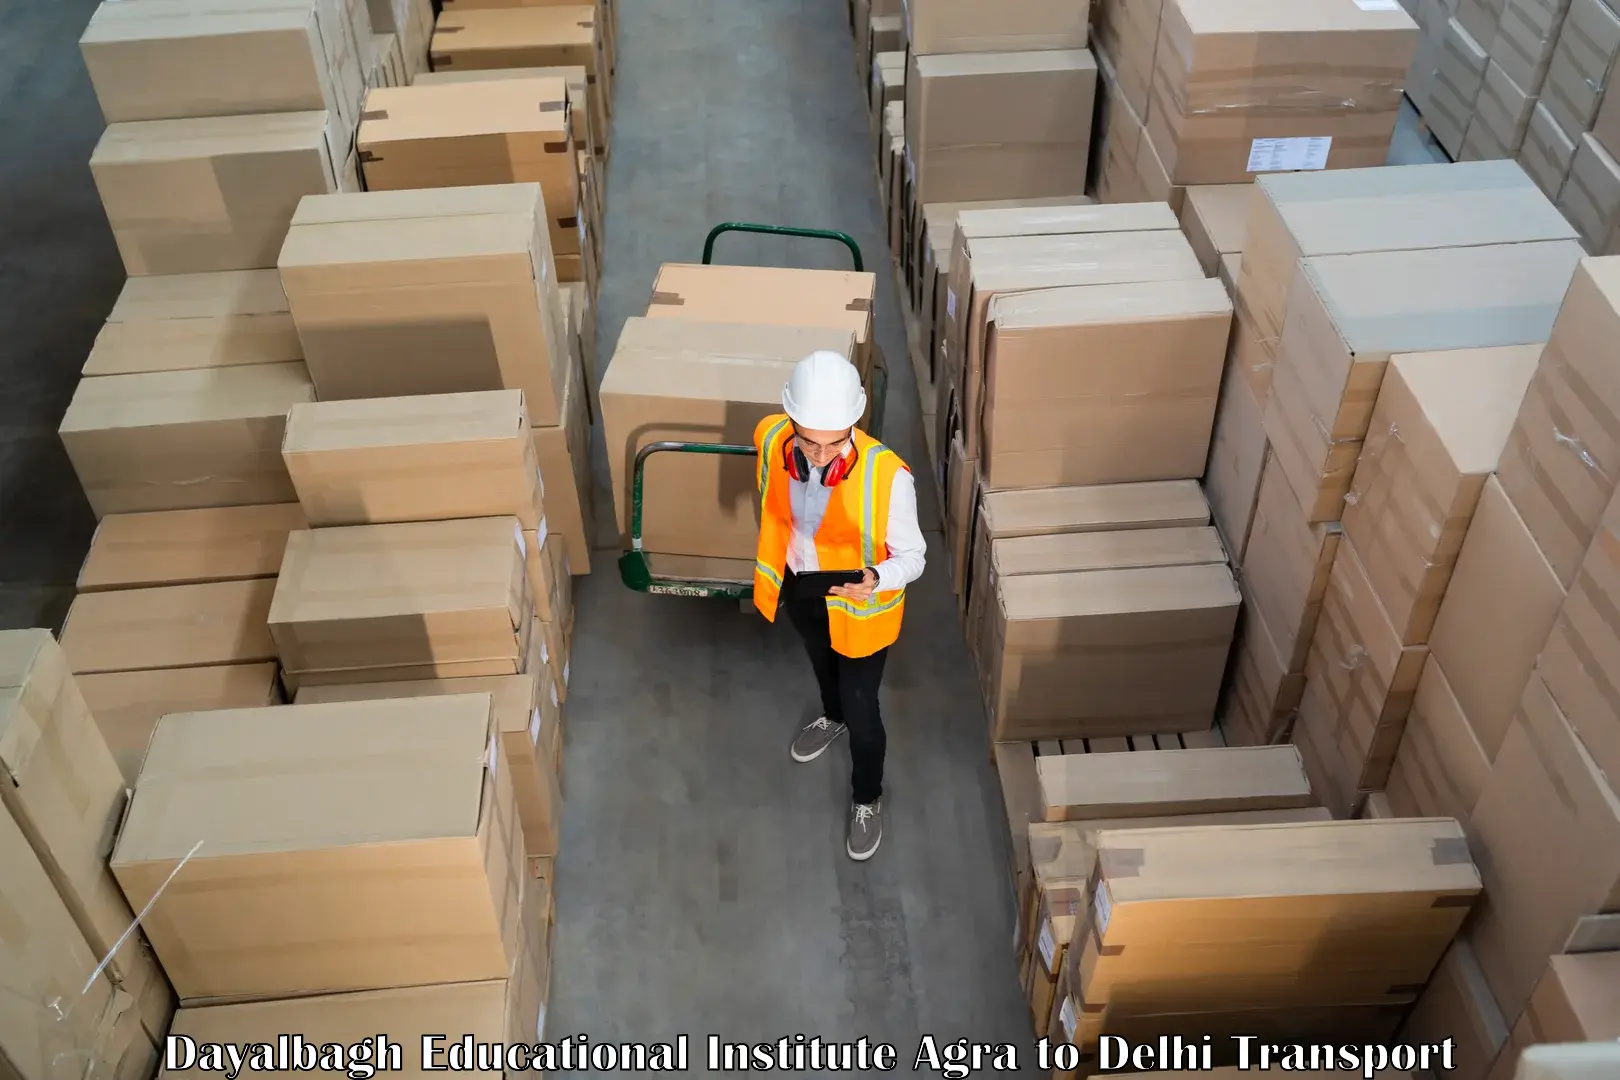 Goods delivery service Dayalbagh Educational Institute Agra to East Delhi